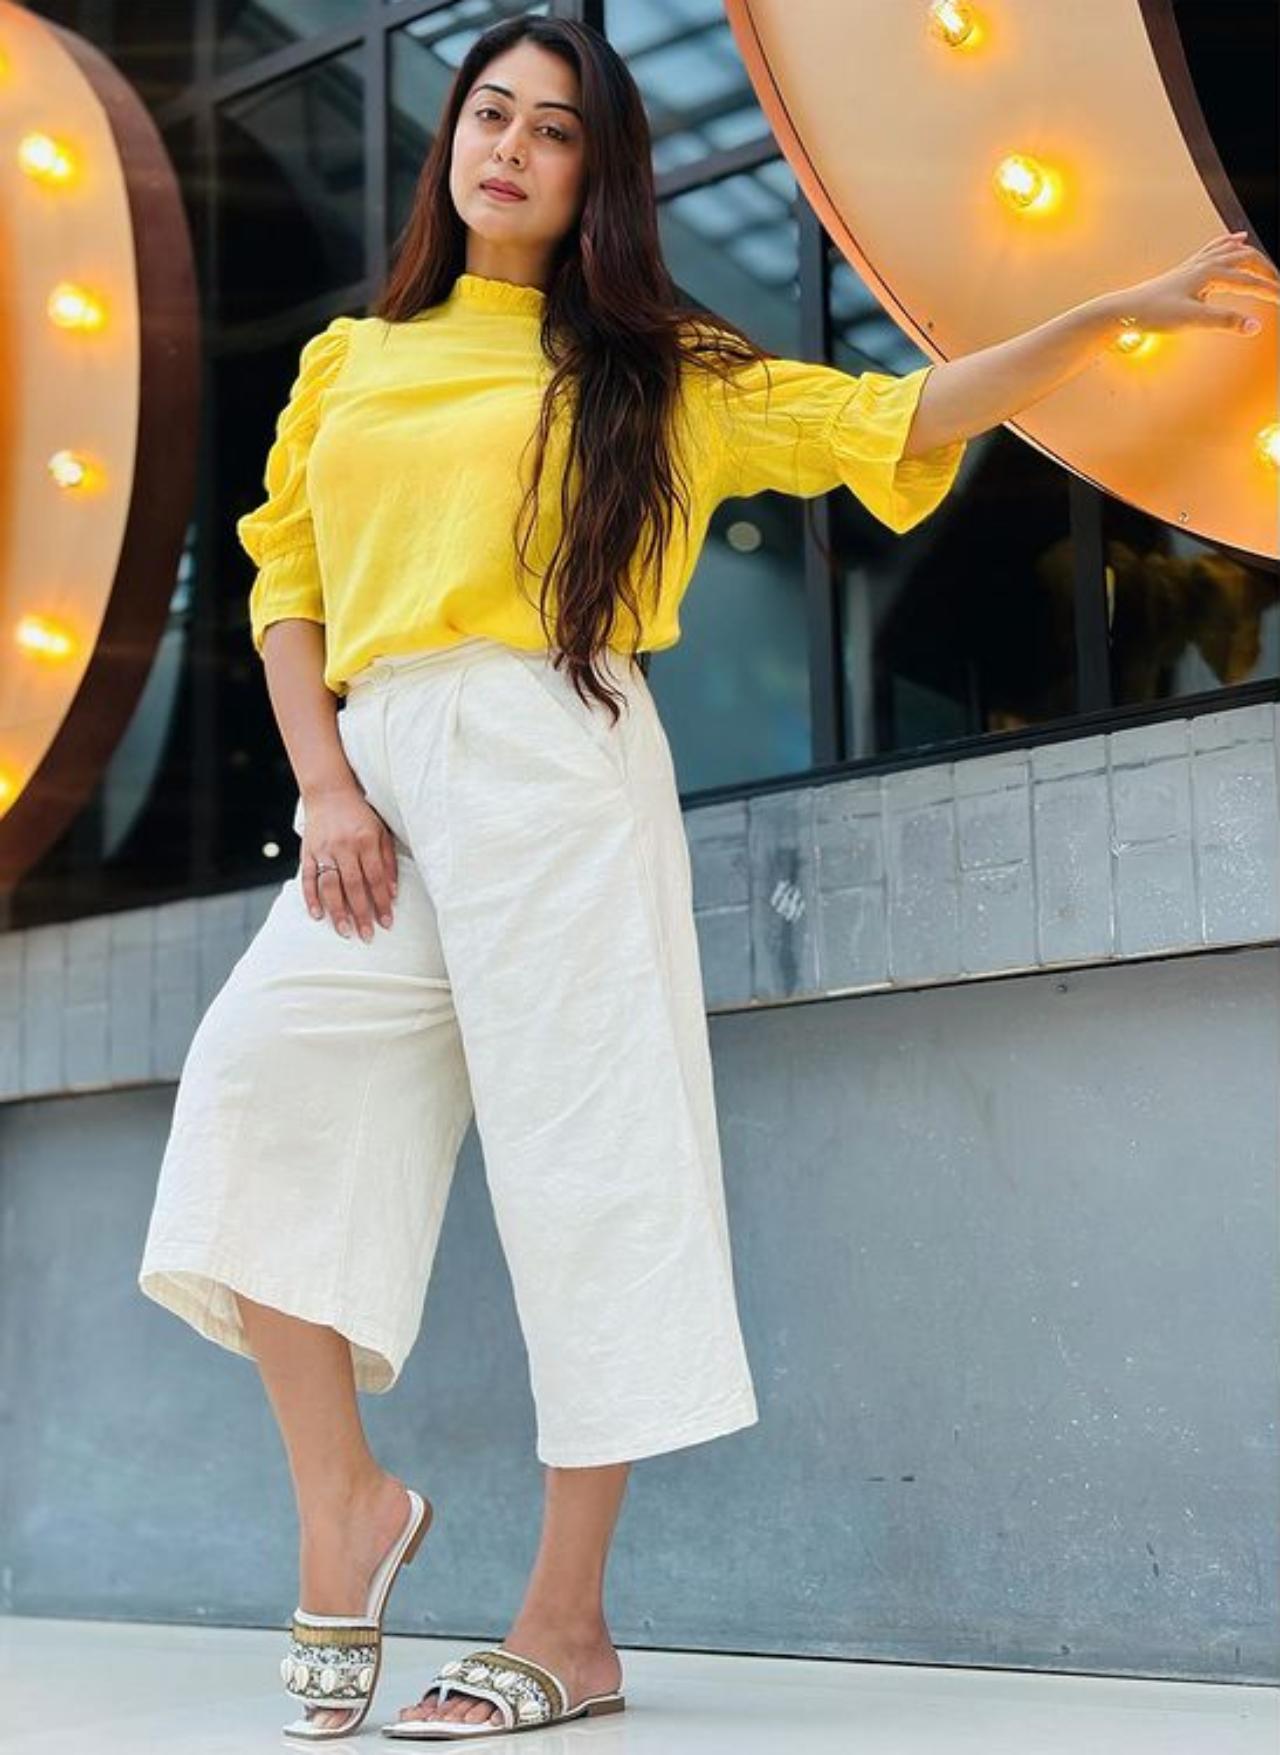 Falaq Naaz opts for a comfortable palazzo and a bright yellow top